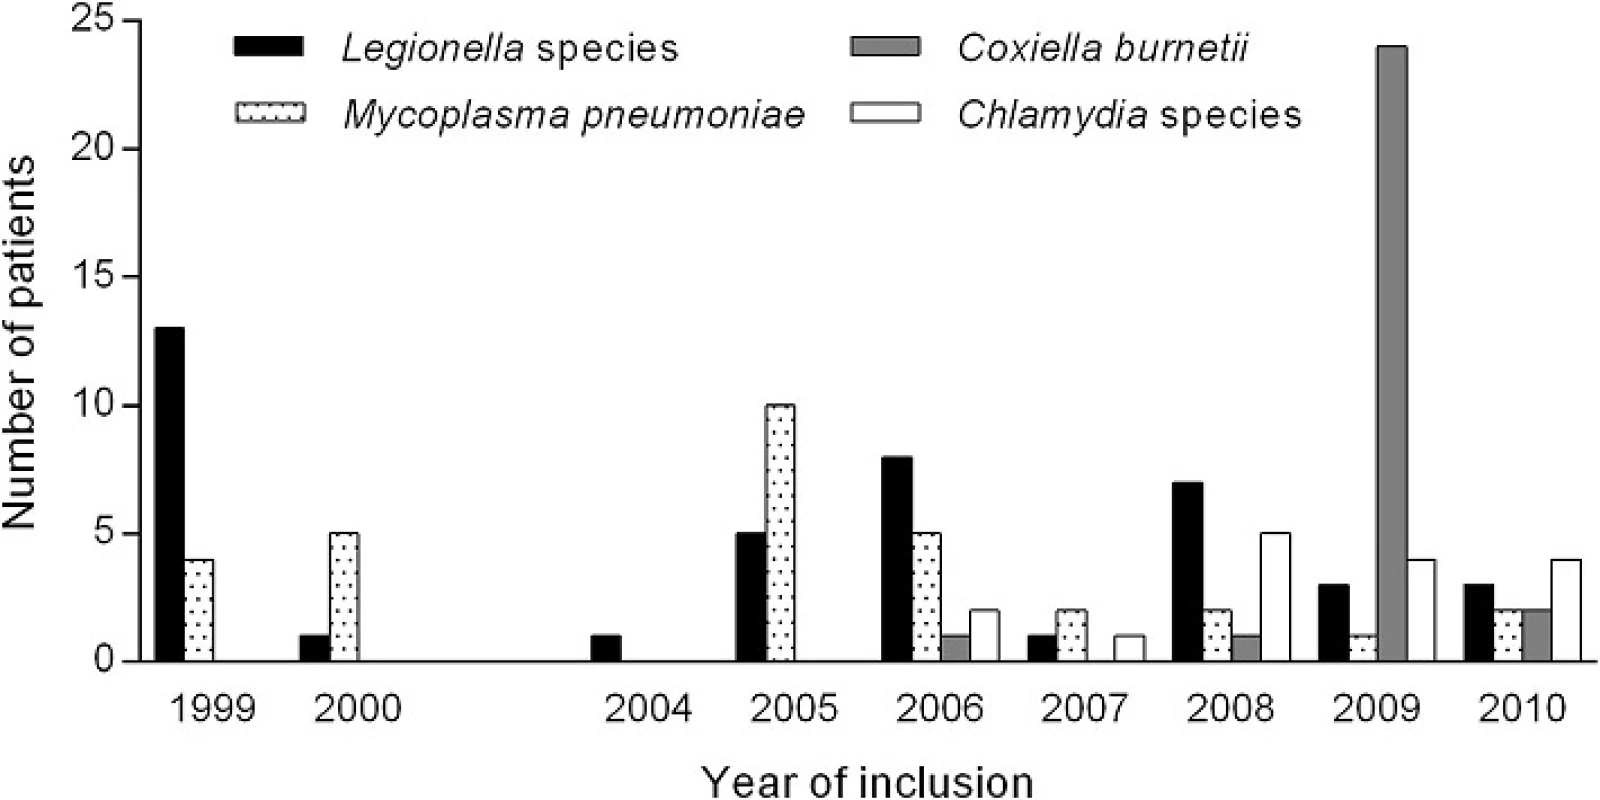 Number of atypical pathogens per year of inclusion